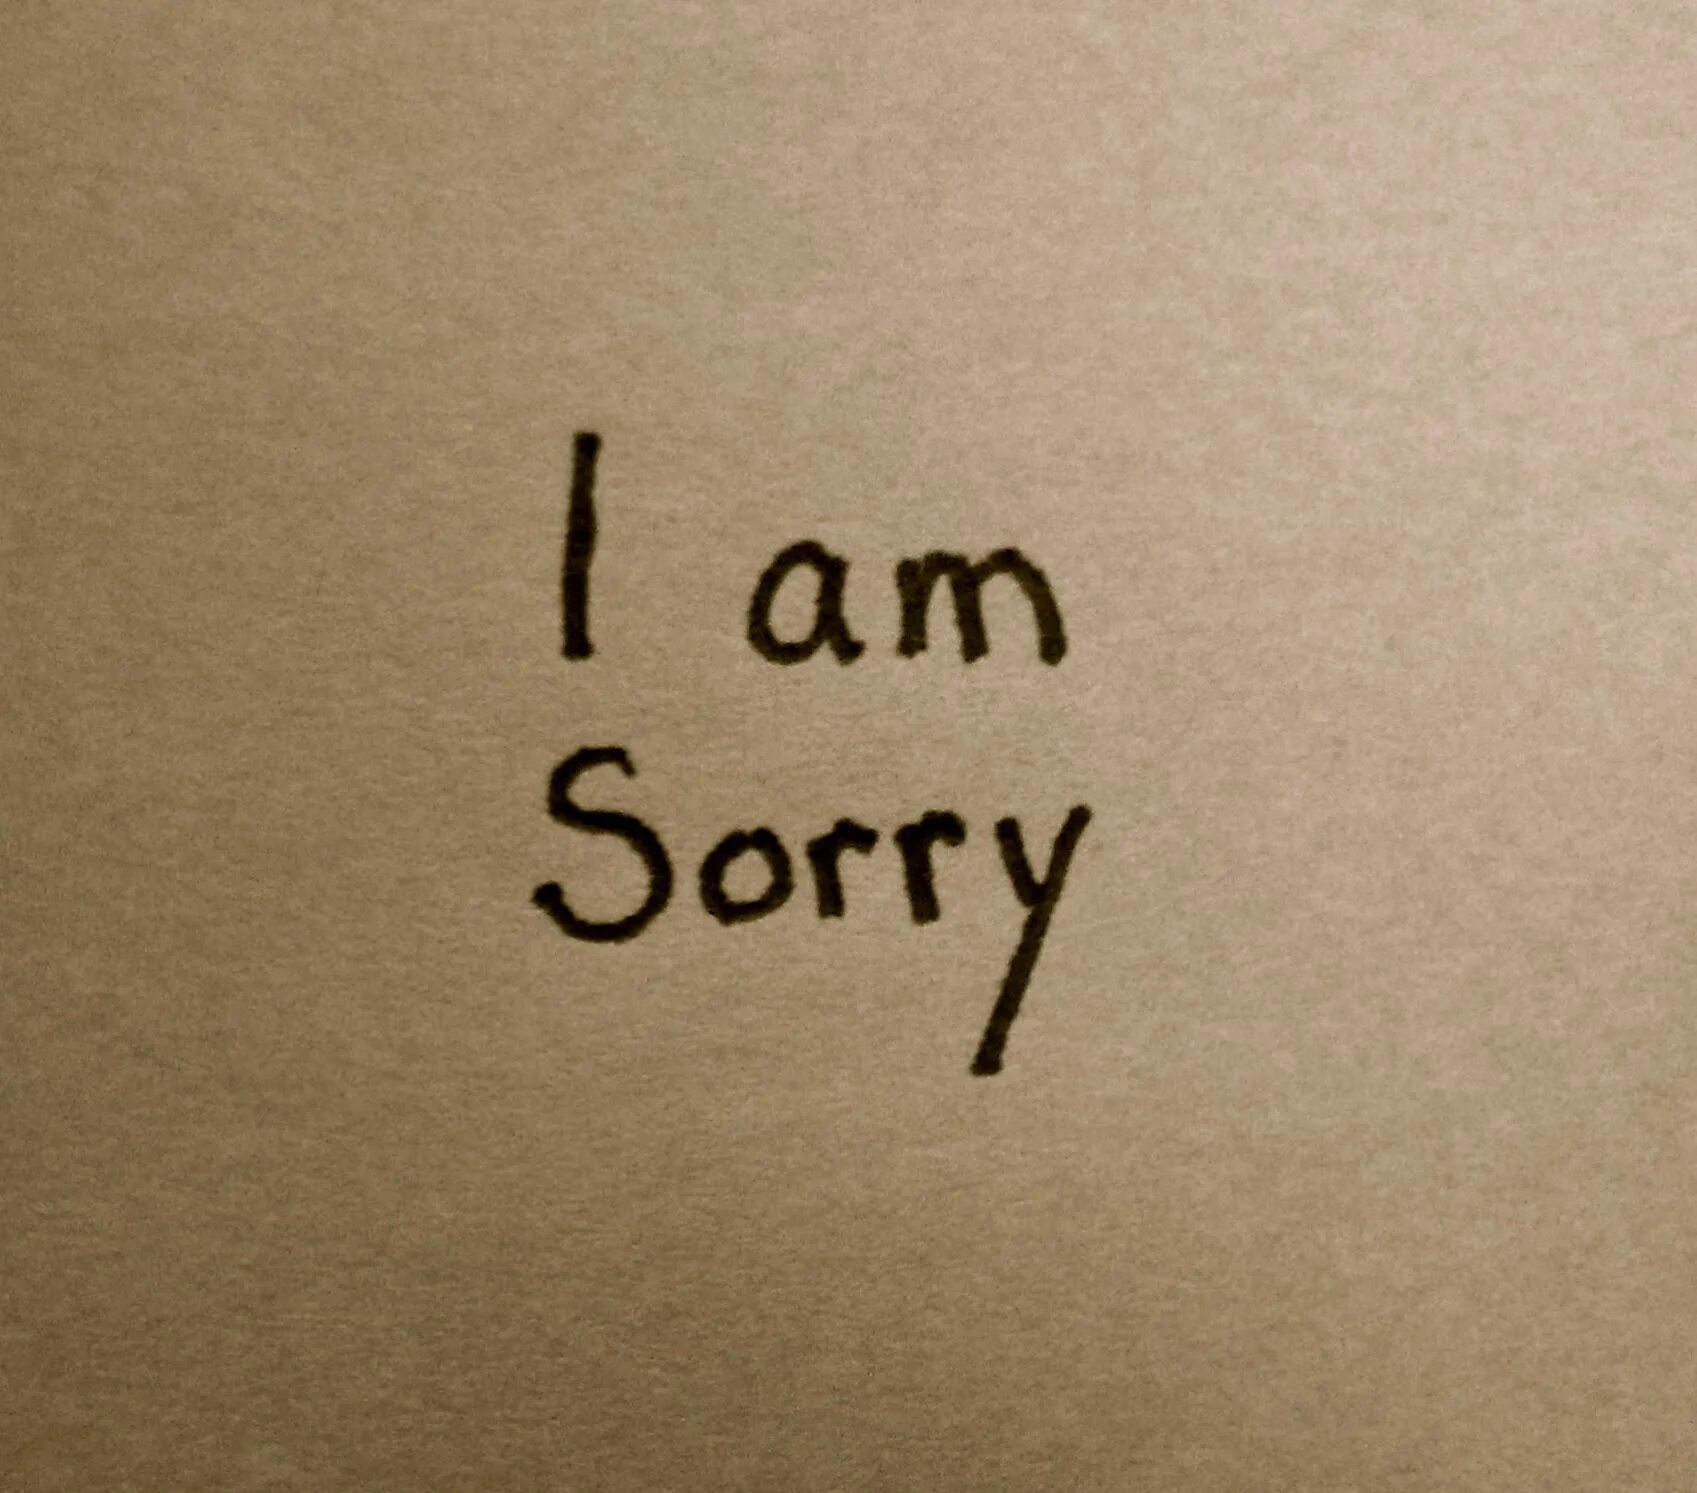 Really sorry for your. Sorry надпись. Сорри картинка. I am sorry. I M sorry надпись.